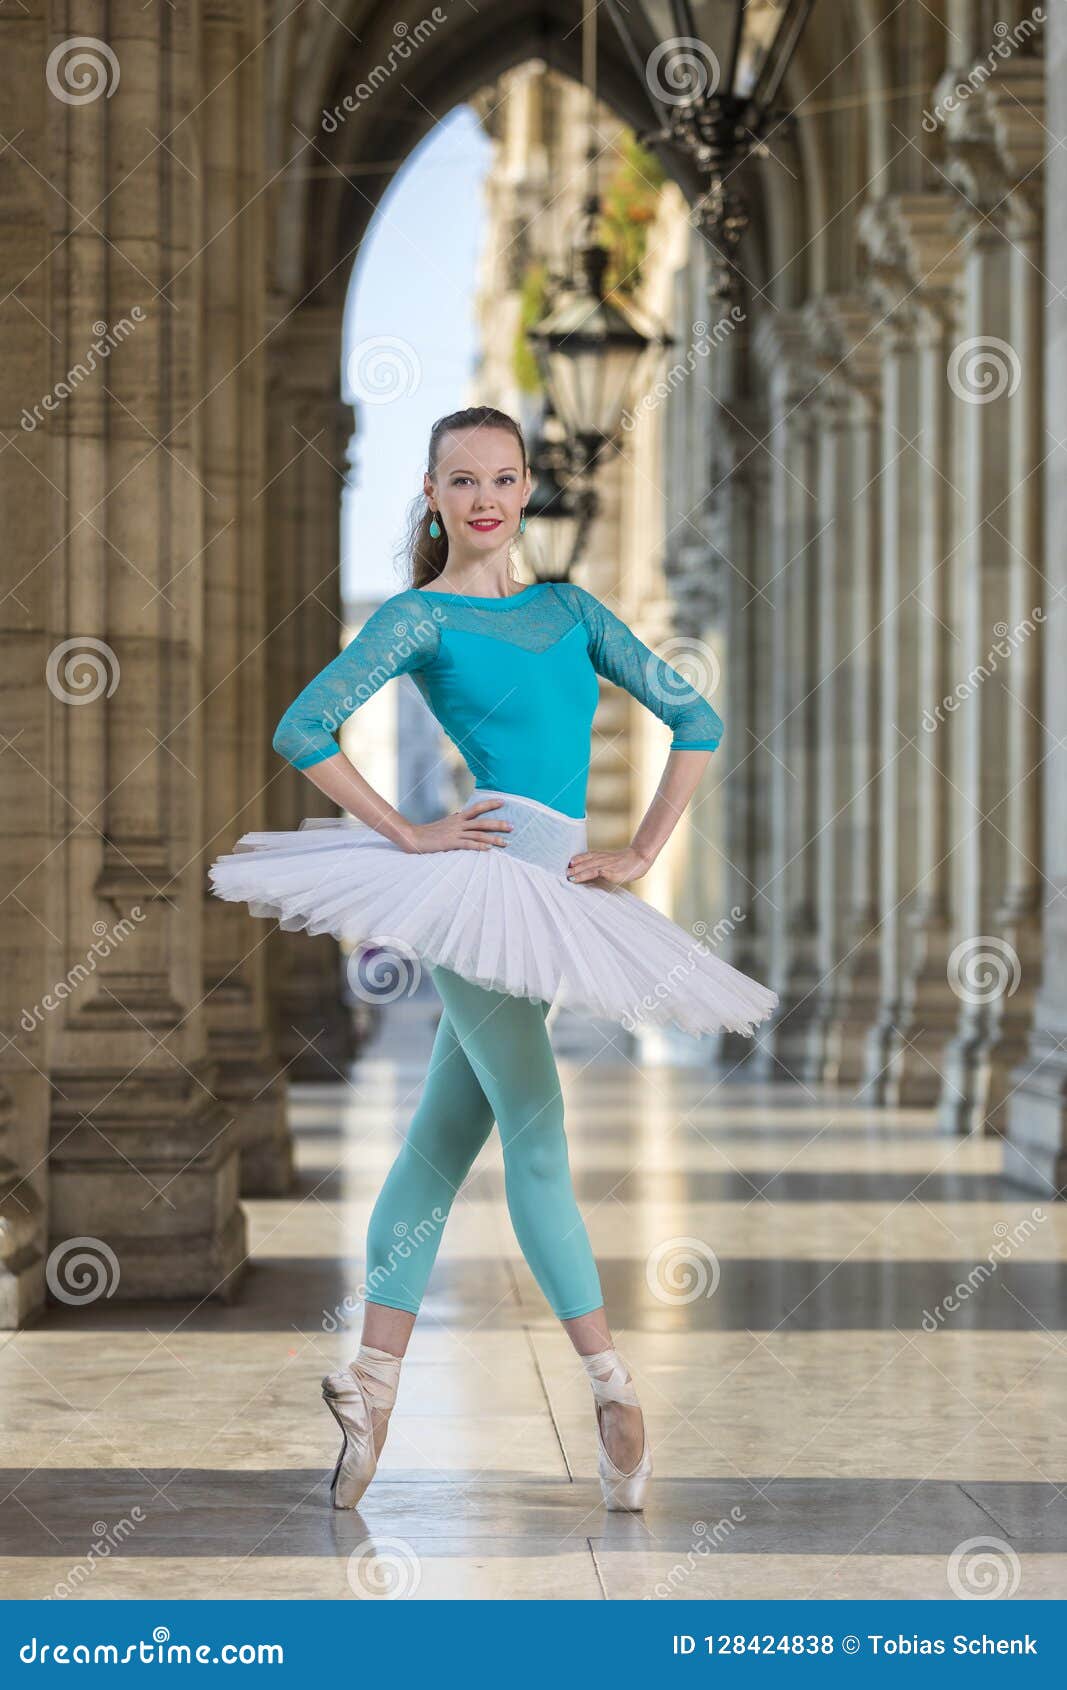 young dancer with tutu and turqoise trikot